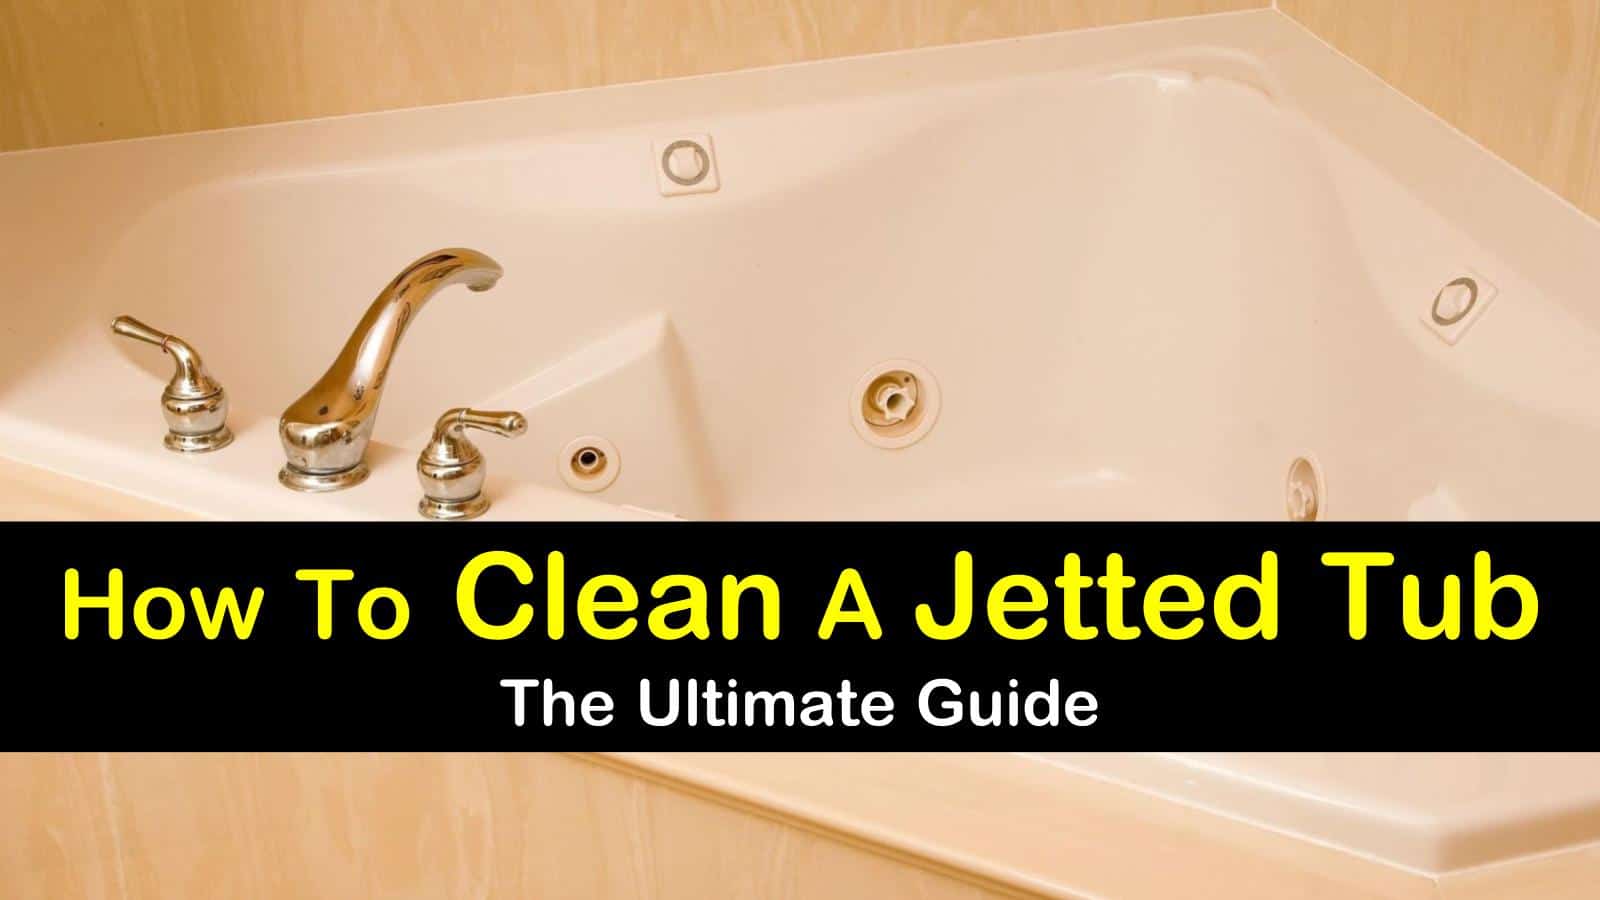 3 Smart Simple Ways To Clean A Jetted Tub, How To Add Jets A Bathtub